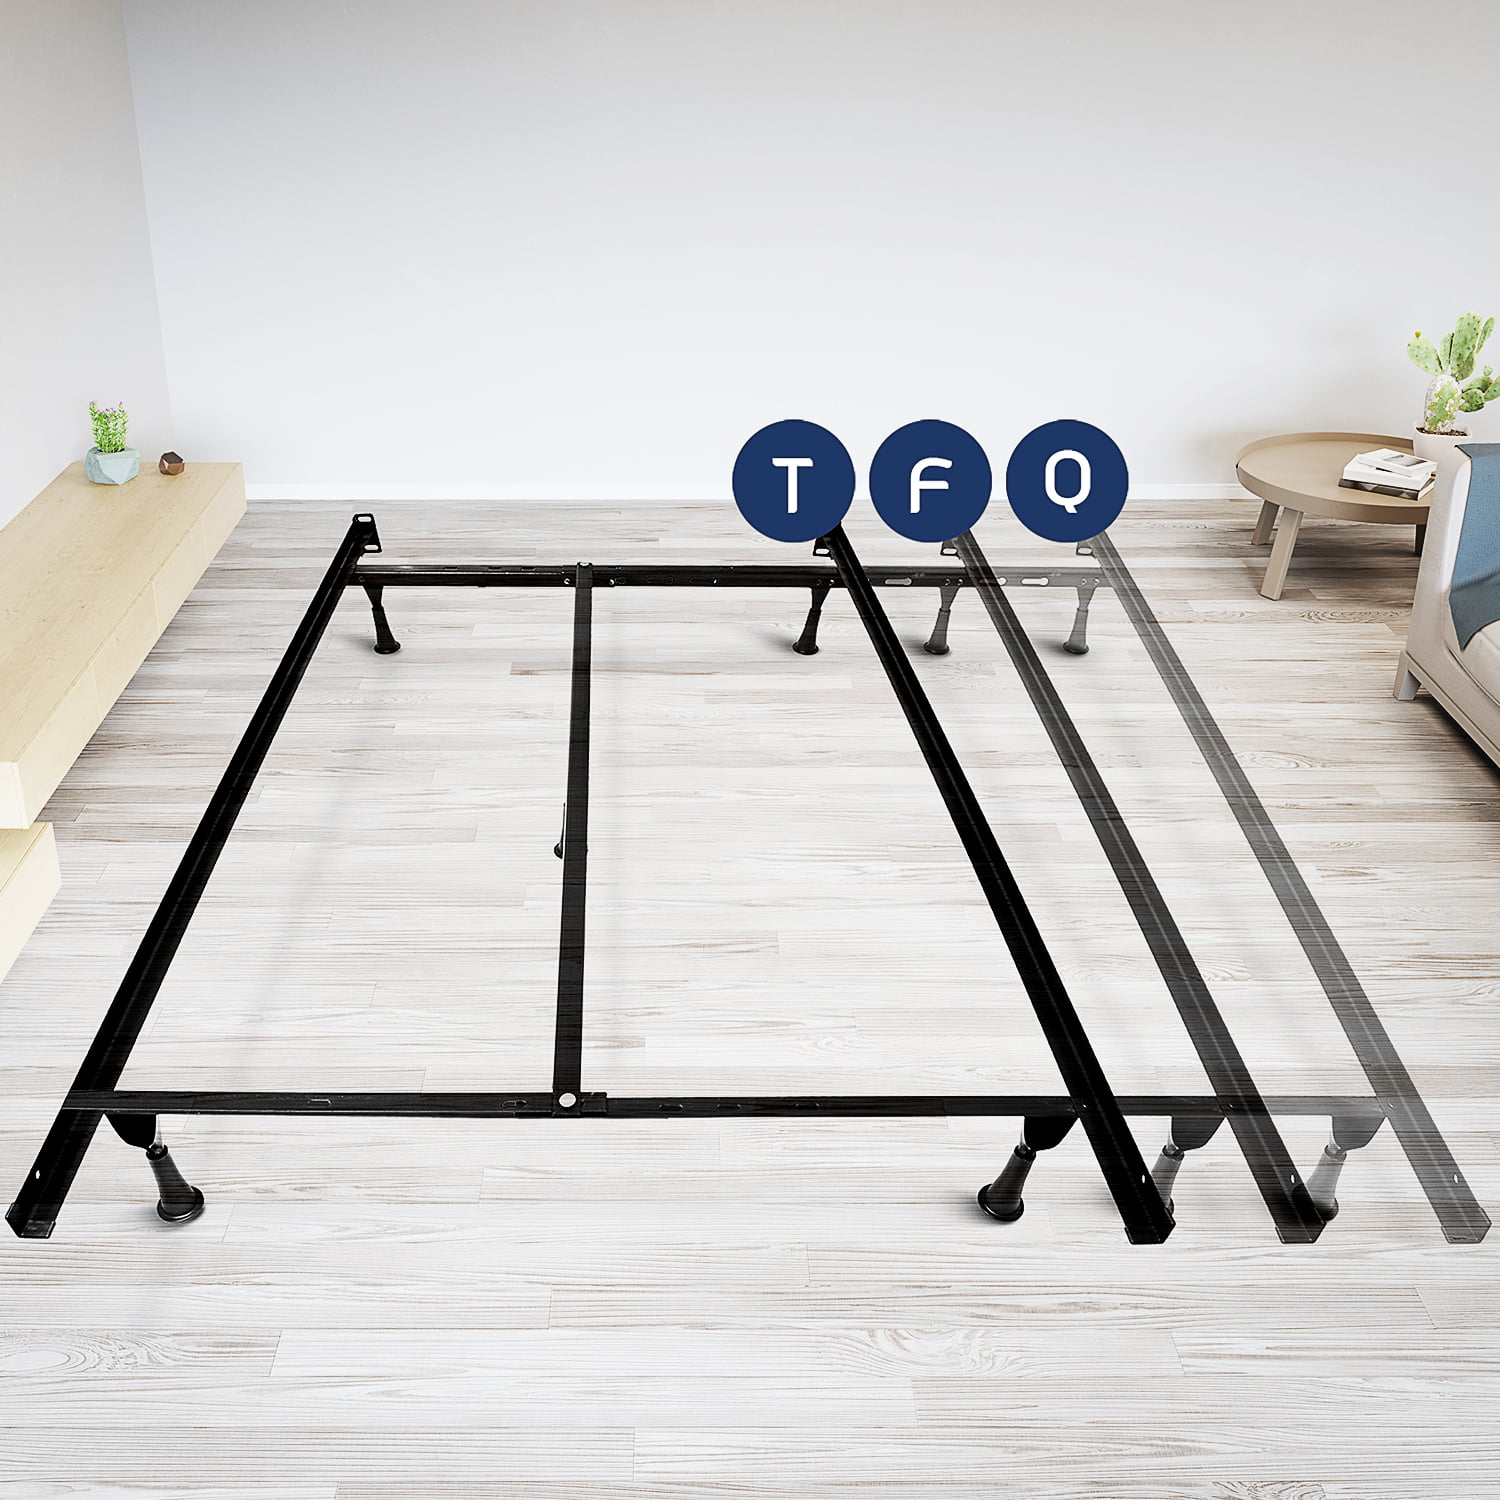 Size Adjustable Steel Bed Frame With Casters Wheels Heavy Duty Twin Full Queen 